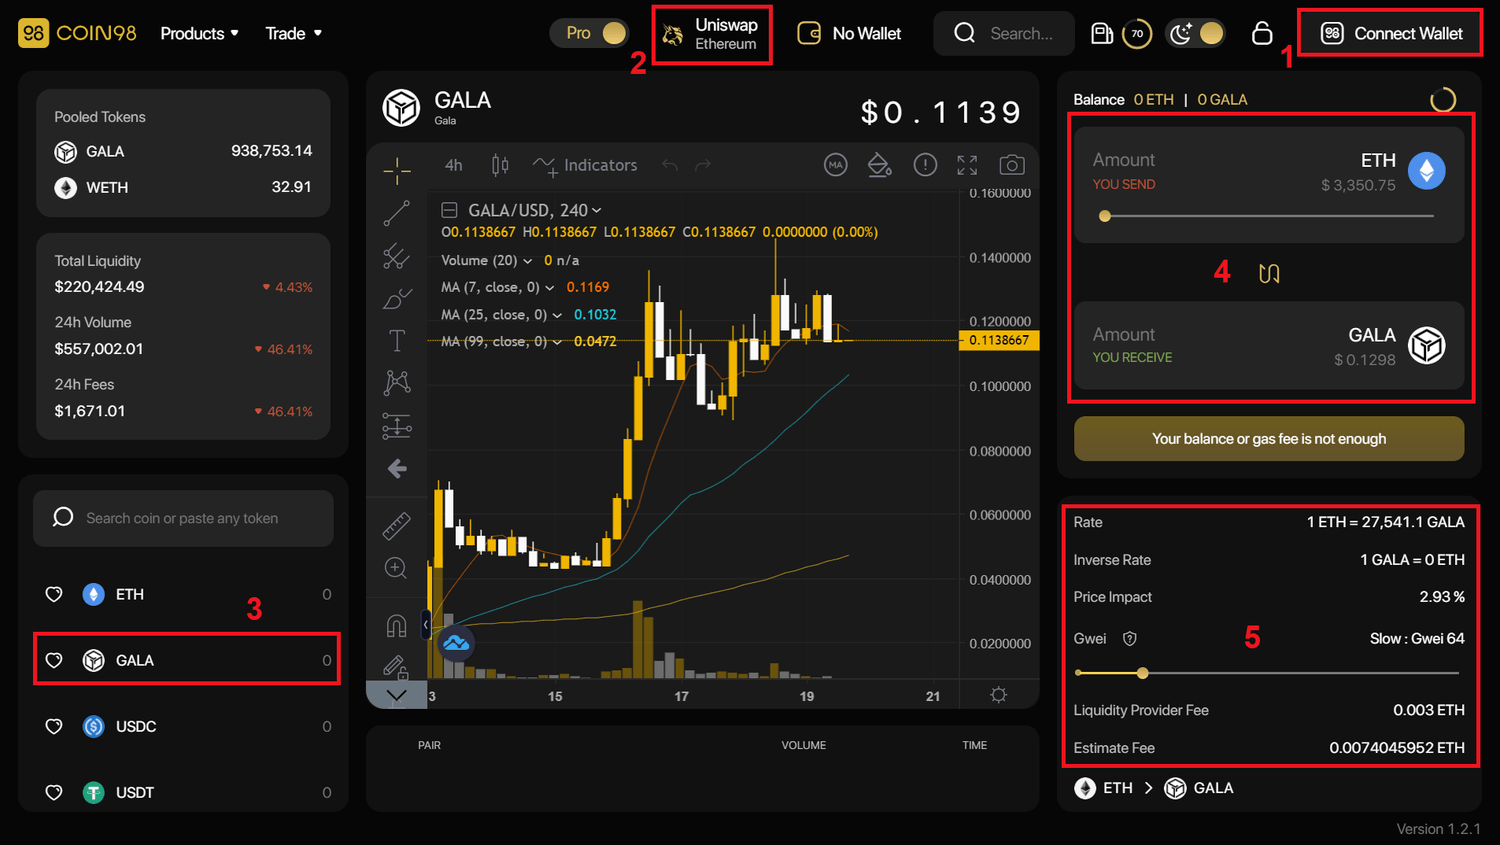 gala coin98 exchange